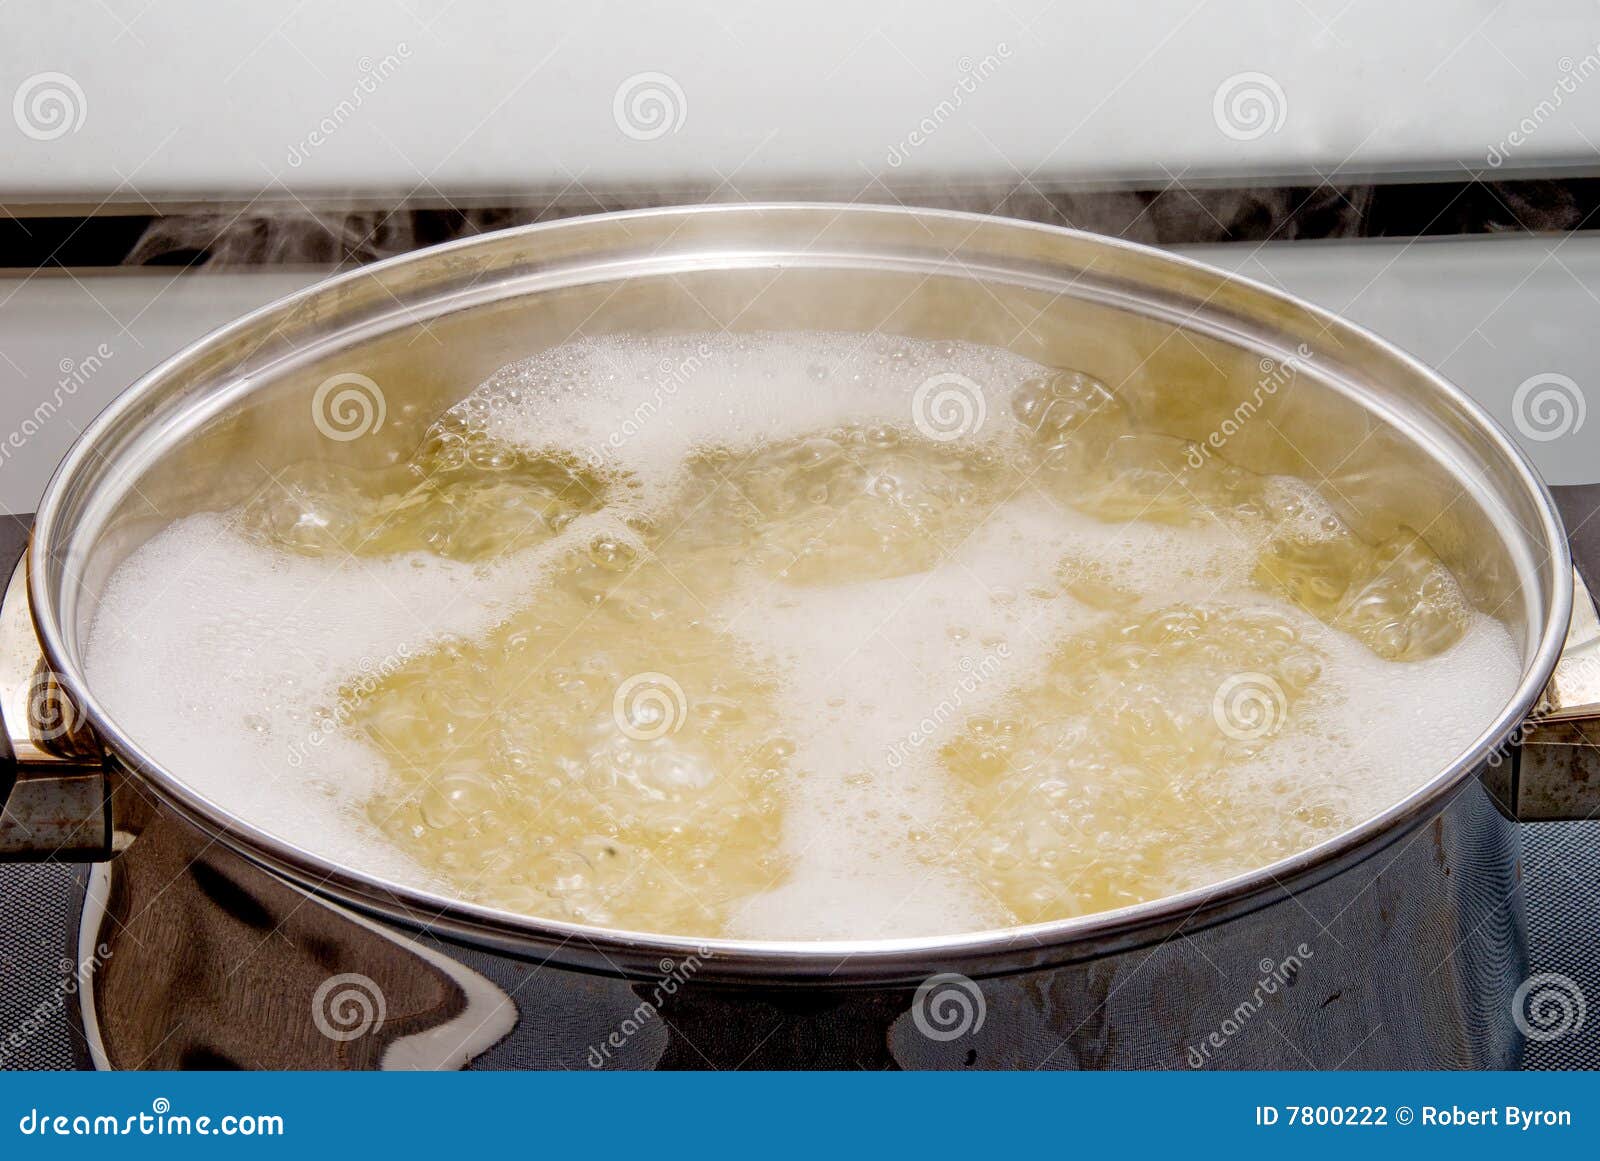 39,600+ Boiling Pot Stock Photos, Pictures & Royalty-Free Images